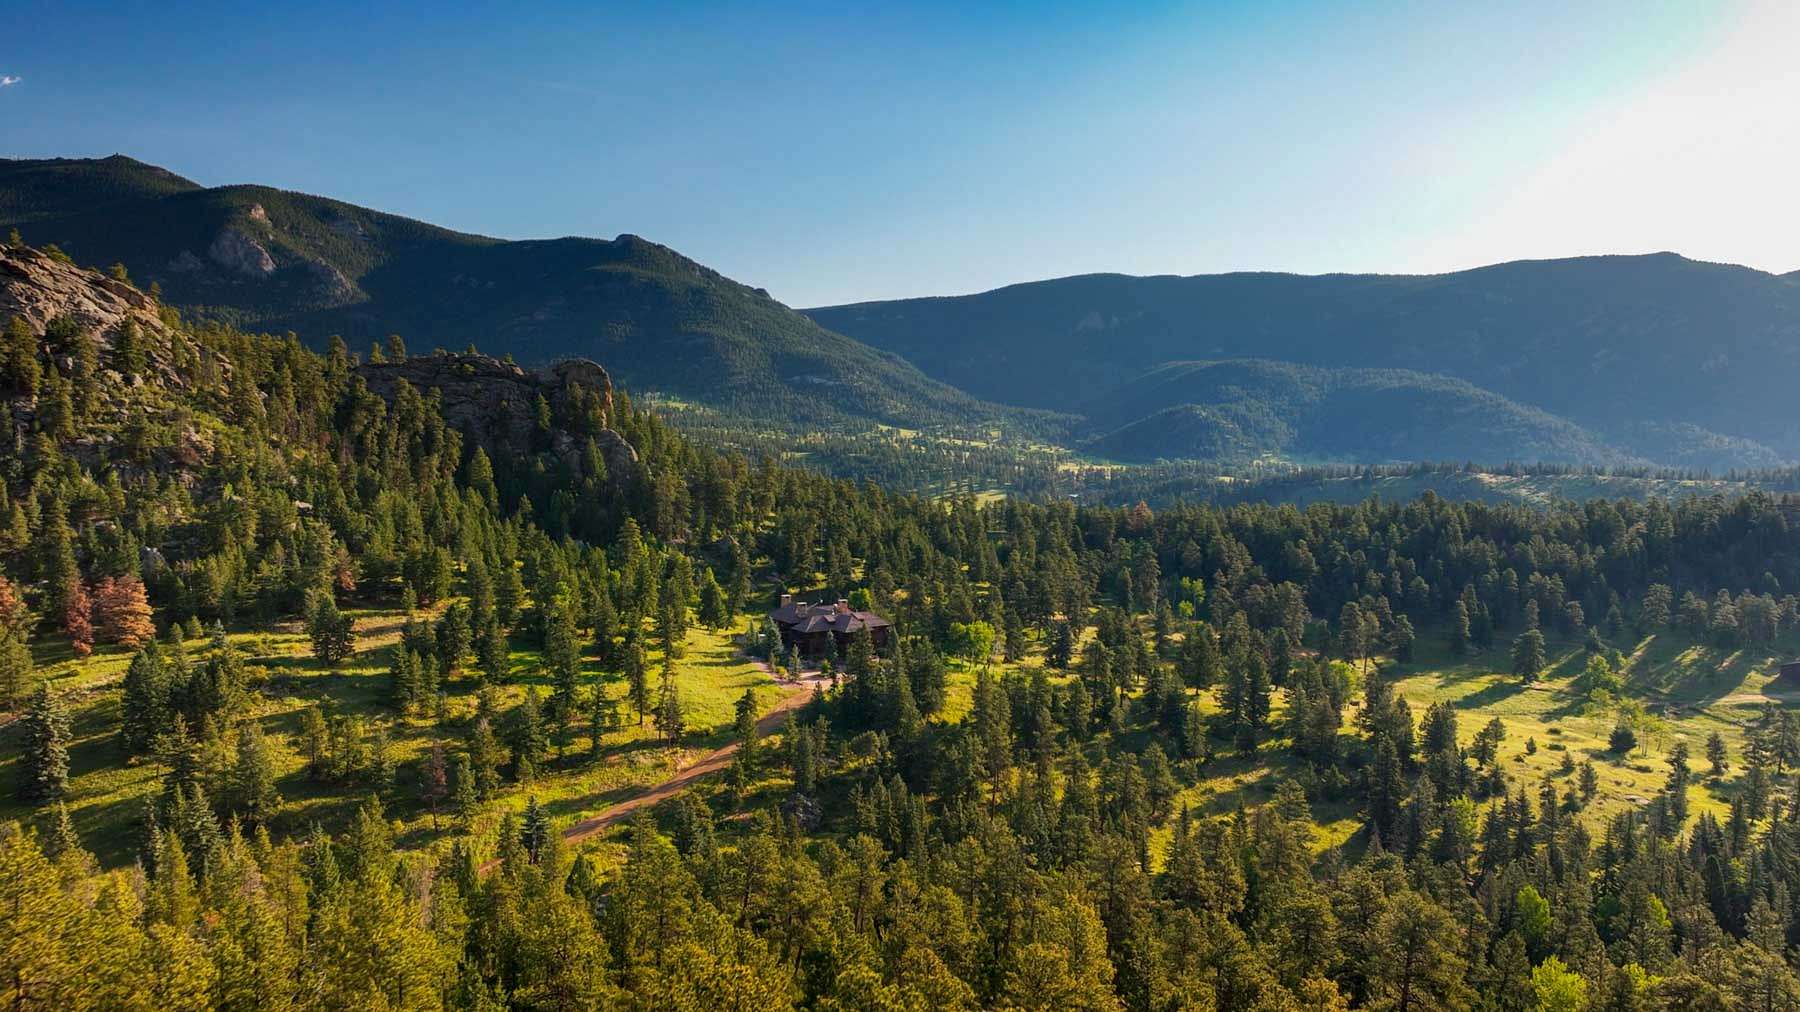 667 Acres of Land for Sale in Evergreen, Colorado